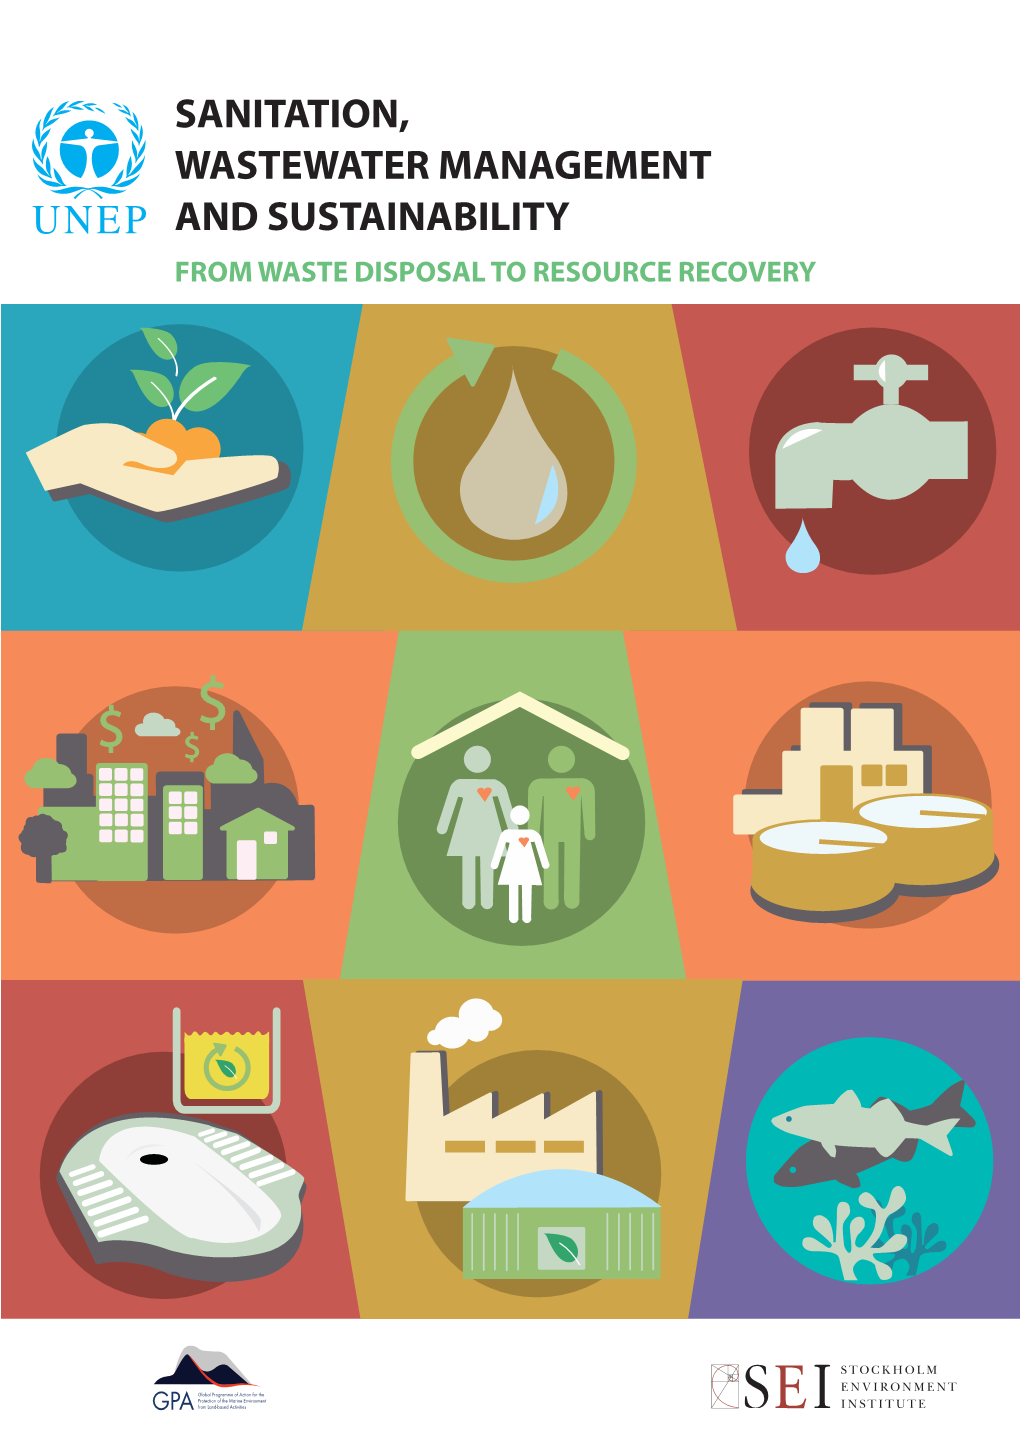 Sanitation, Wastewater Management and Sustainability: Design/Layout: UNEP DCPI and SEI from Waste Disposal to Resource Recovery